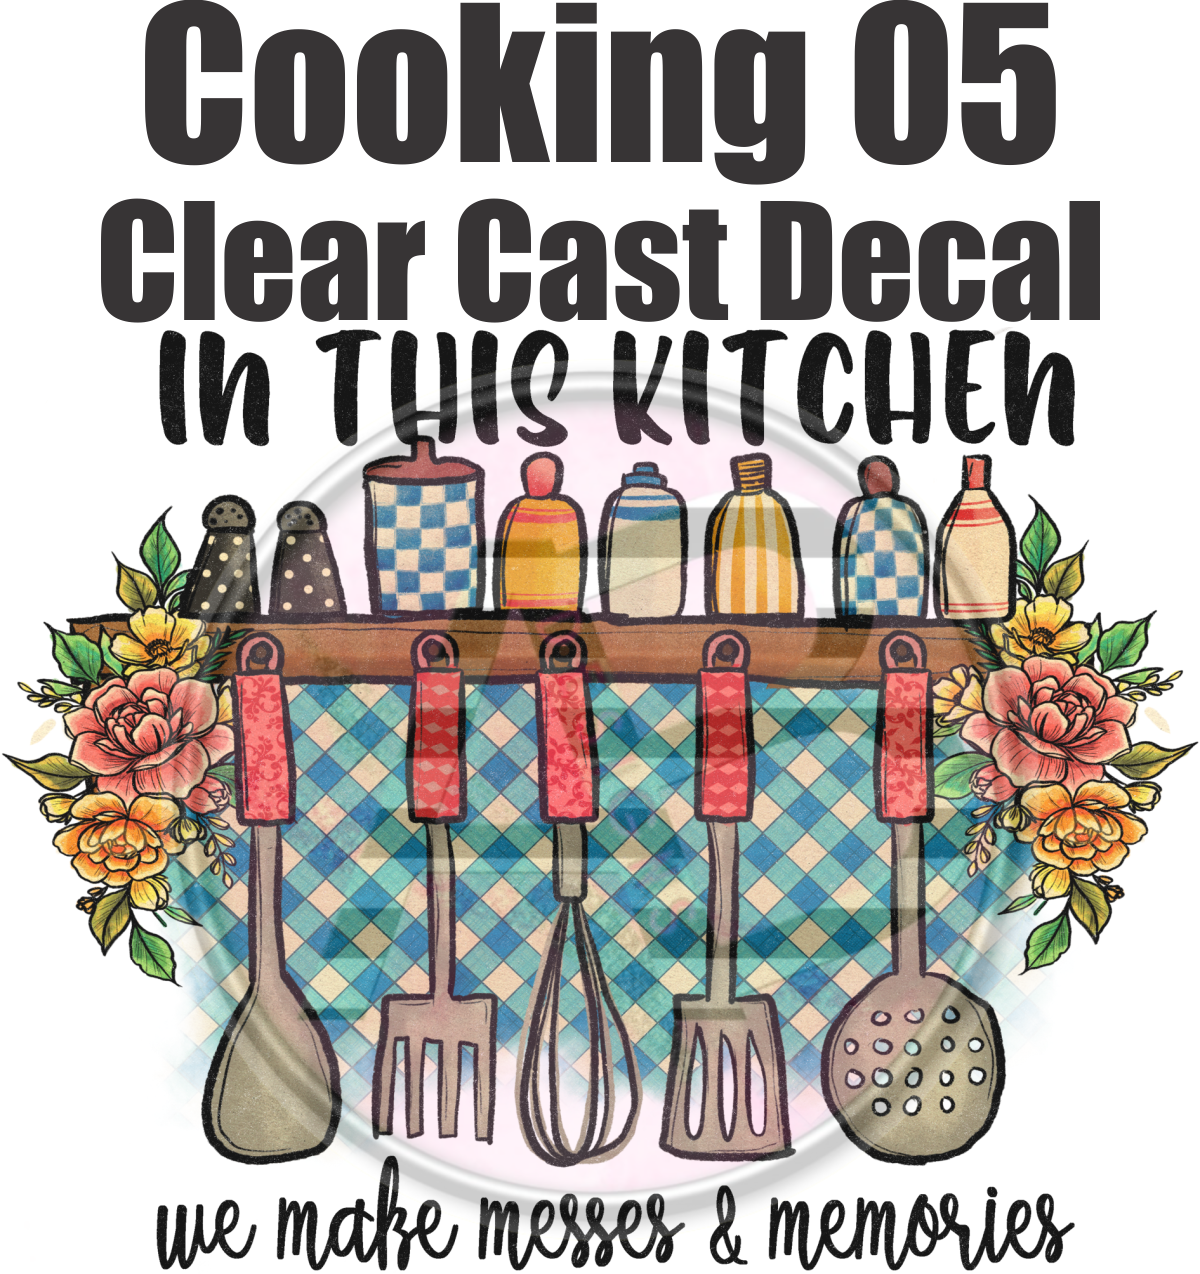 Cooking 05 - Clear Cast Decal - 153